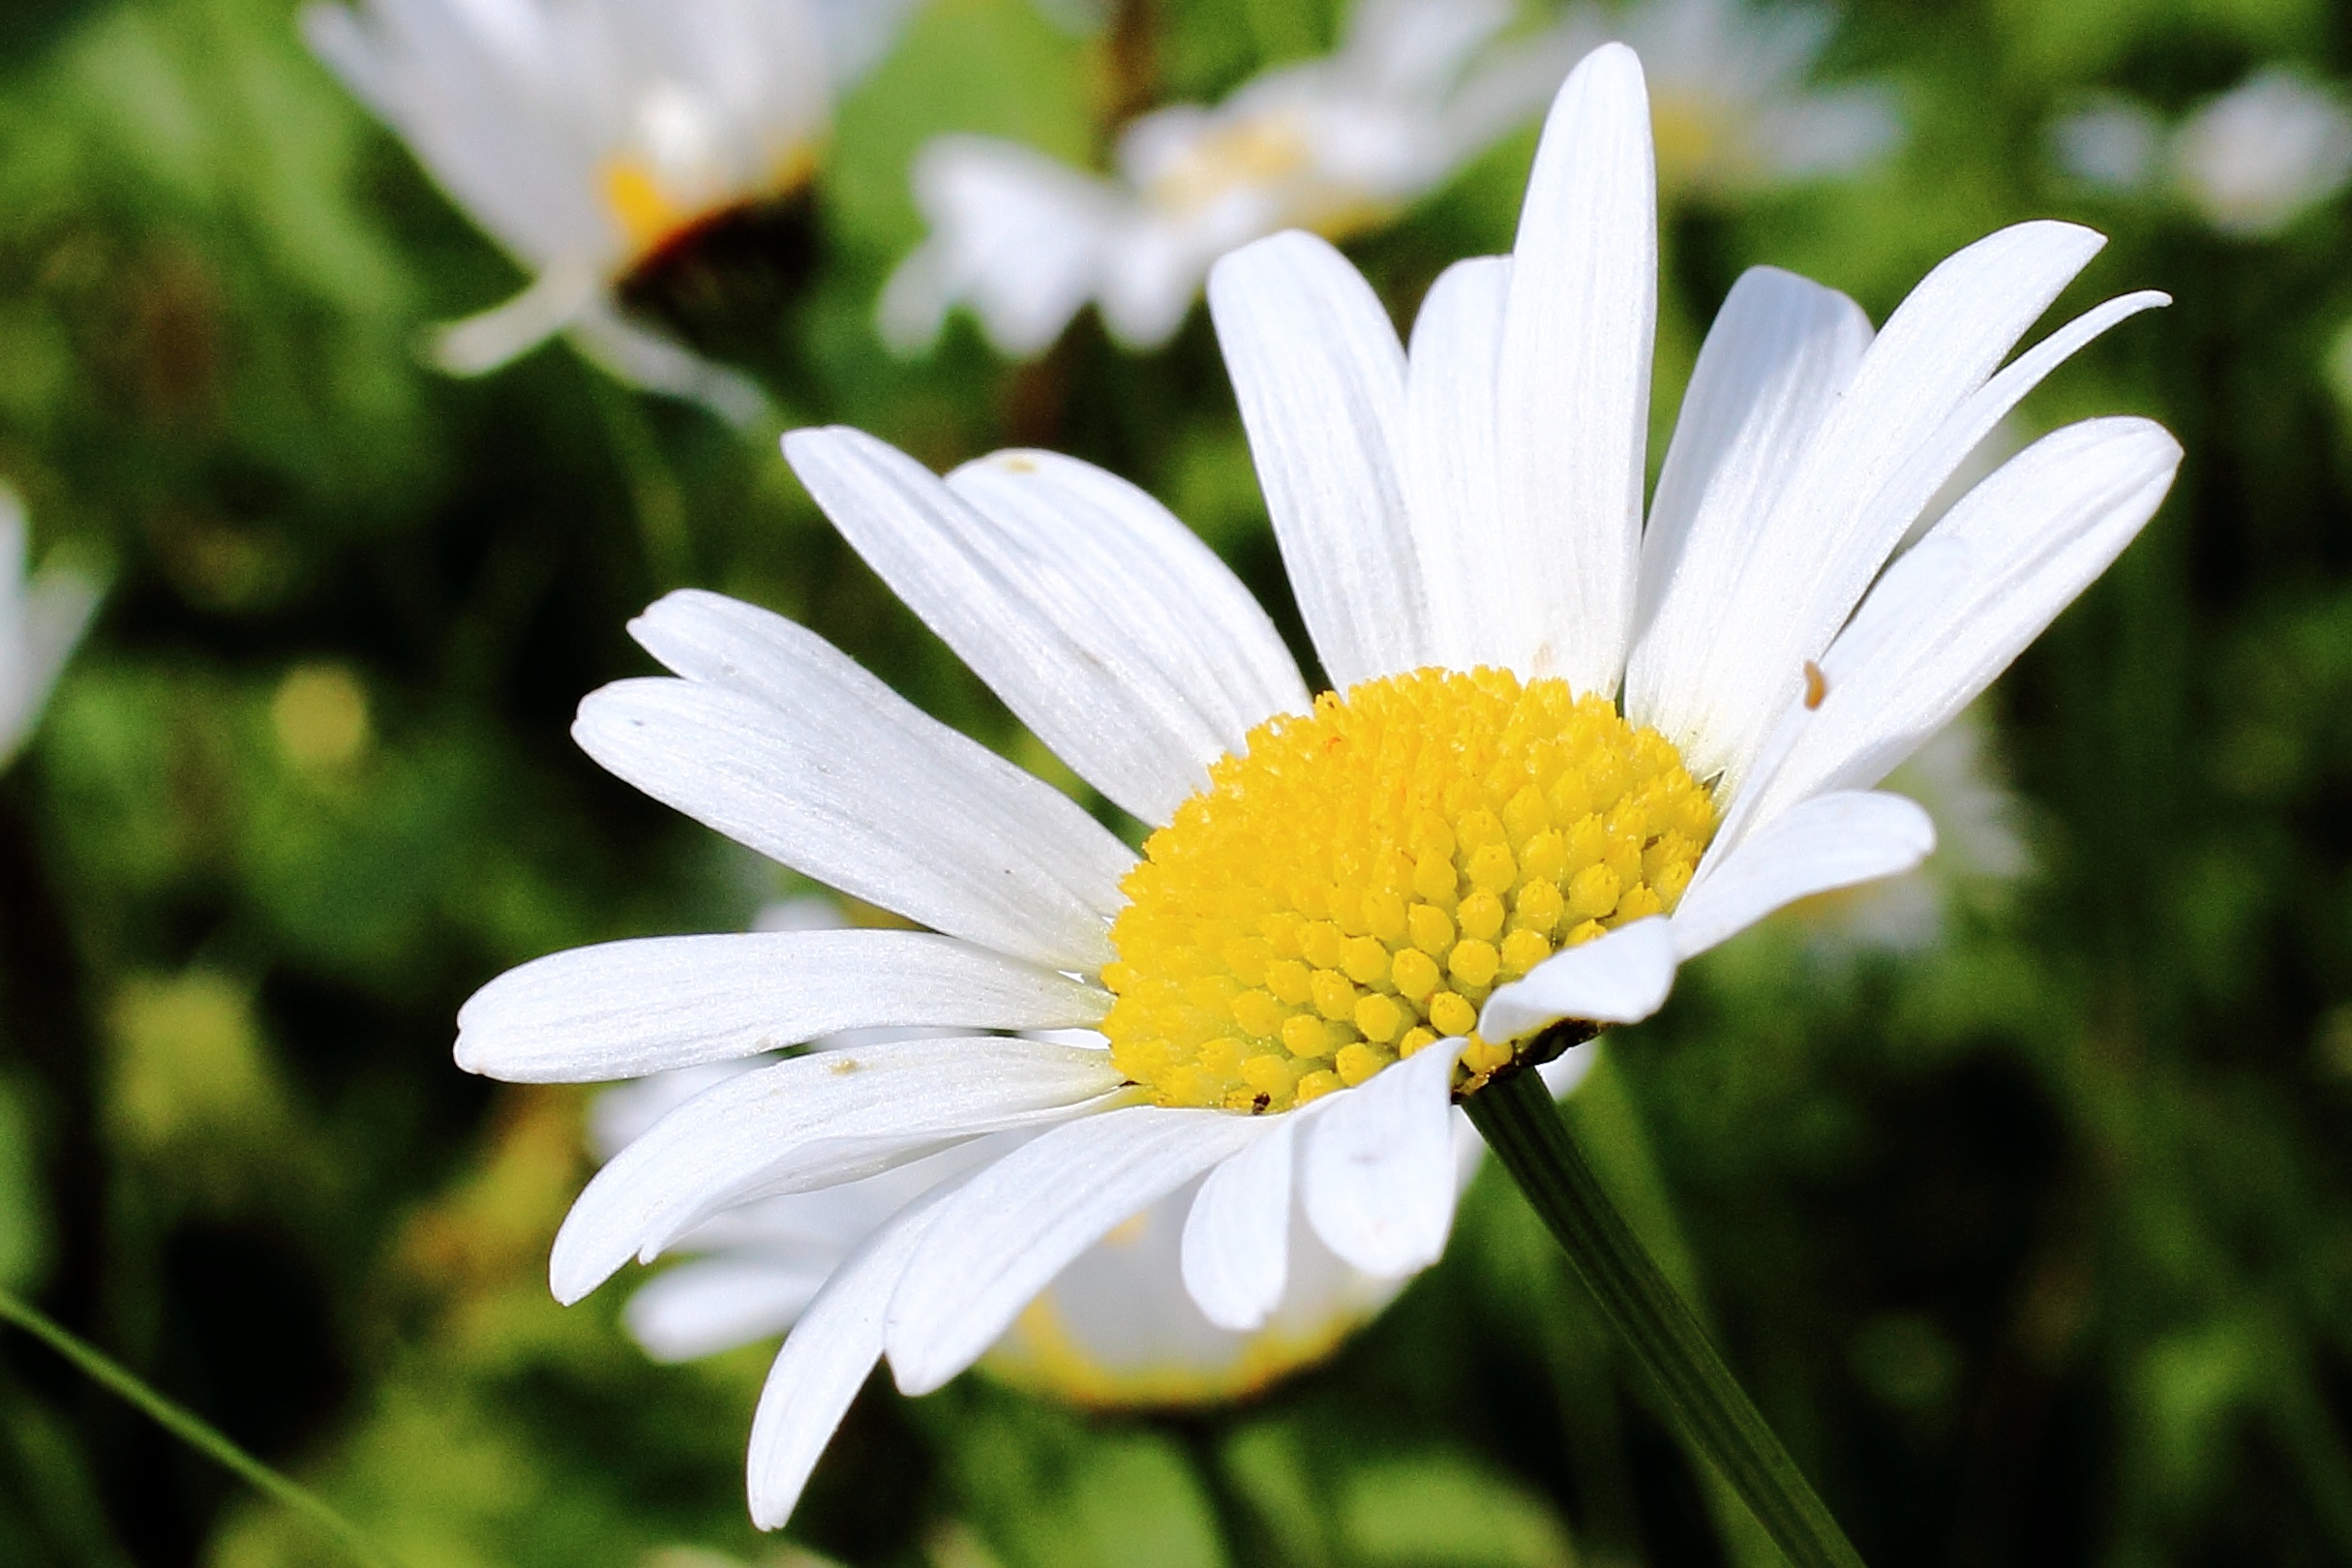 Daisy Blossom Bloom free image download